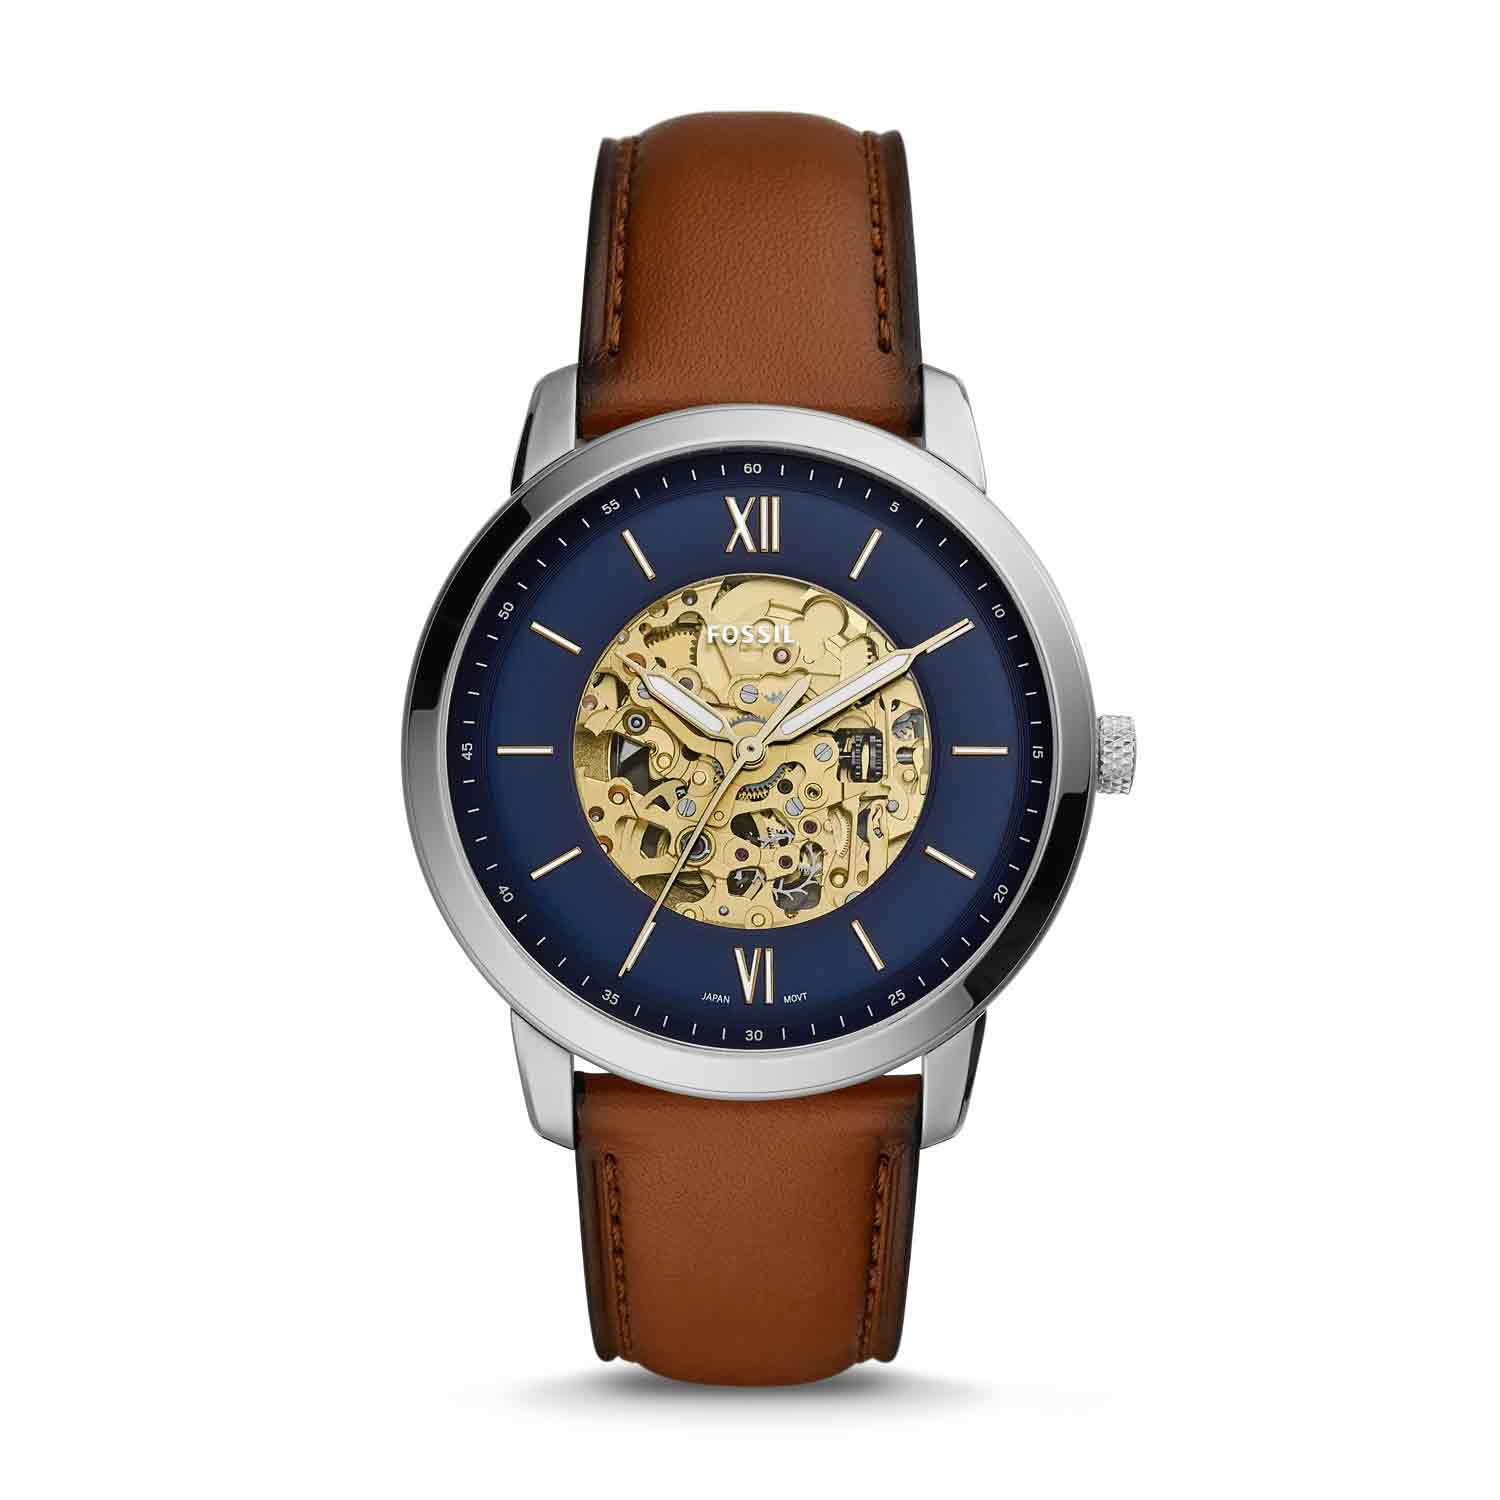 ME3160 Fossil Neutra Automatic Luggage Leather Watch. This 44mm Neutra features a blue satin see-through skeleton dial with Roman numeral and stick indices, automatic movement and a luggage leather strap.. The automatic movement features a built-in rotor 